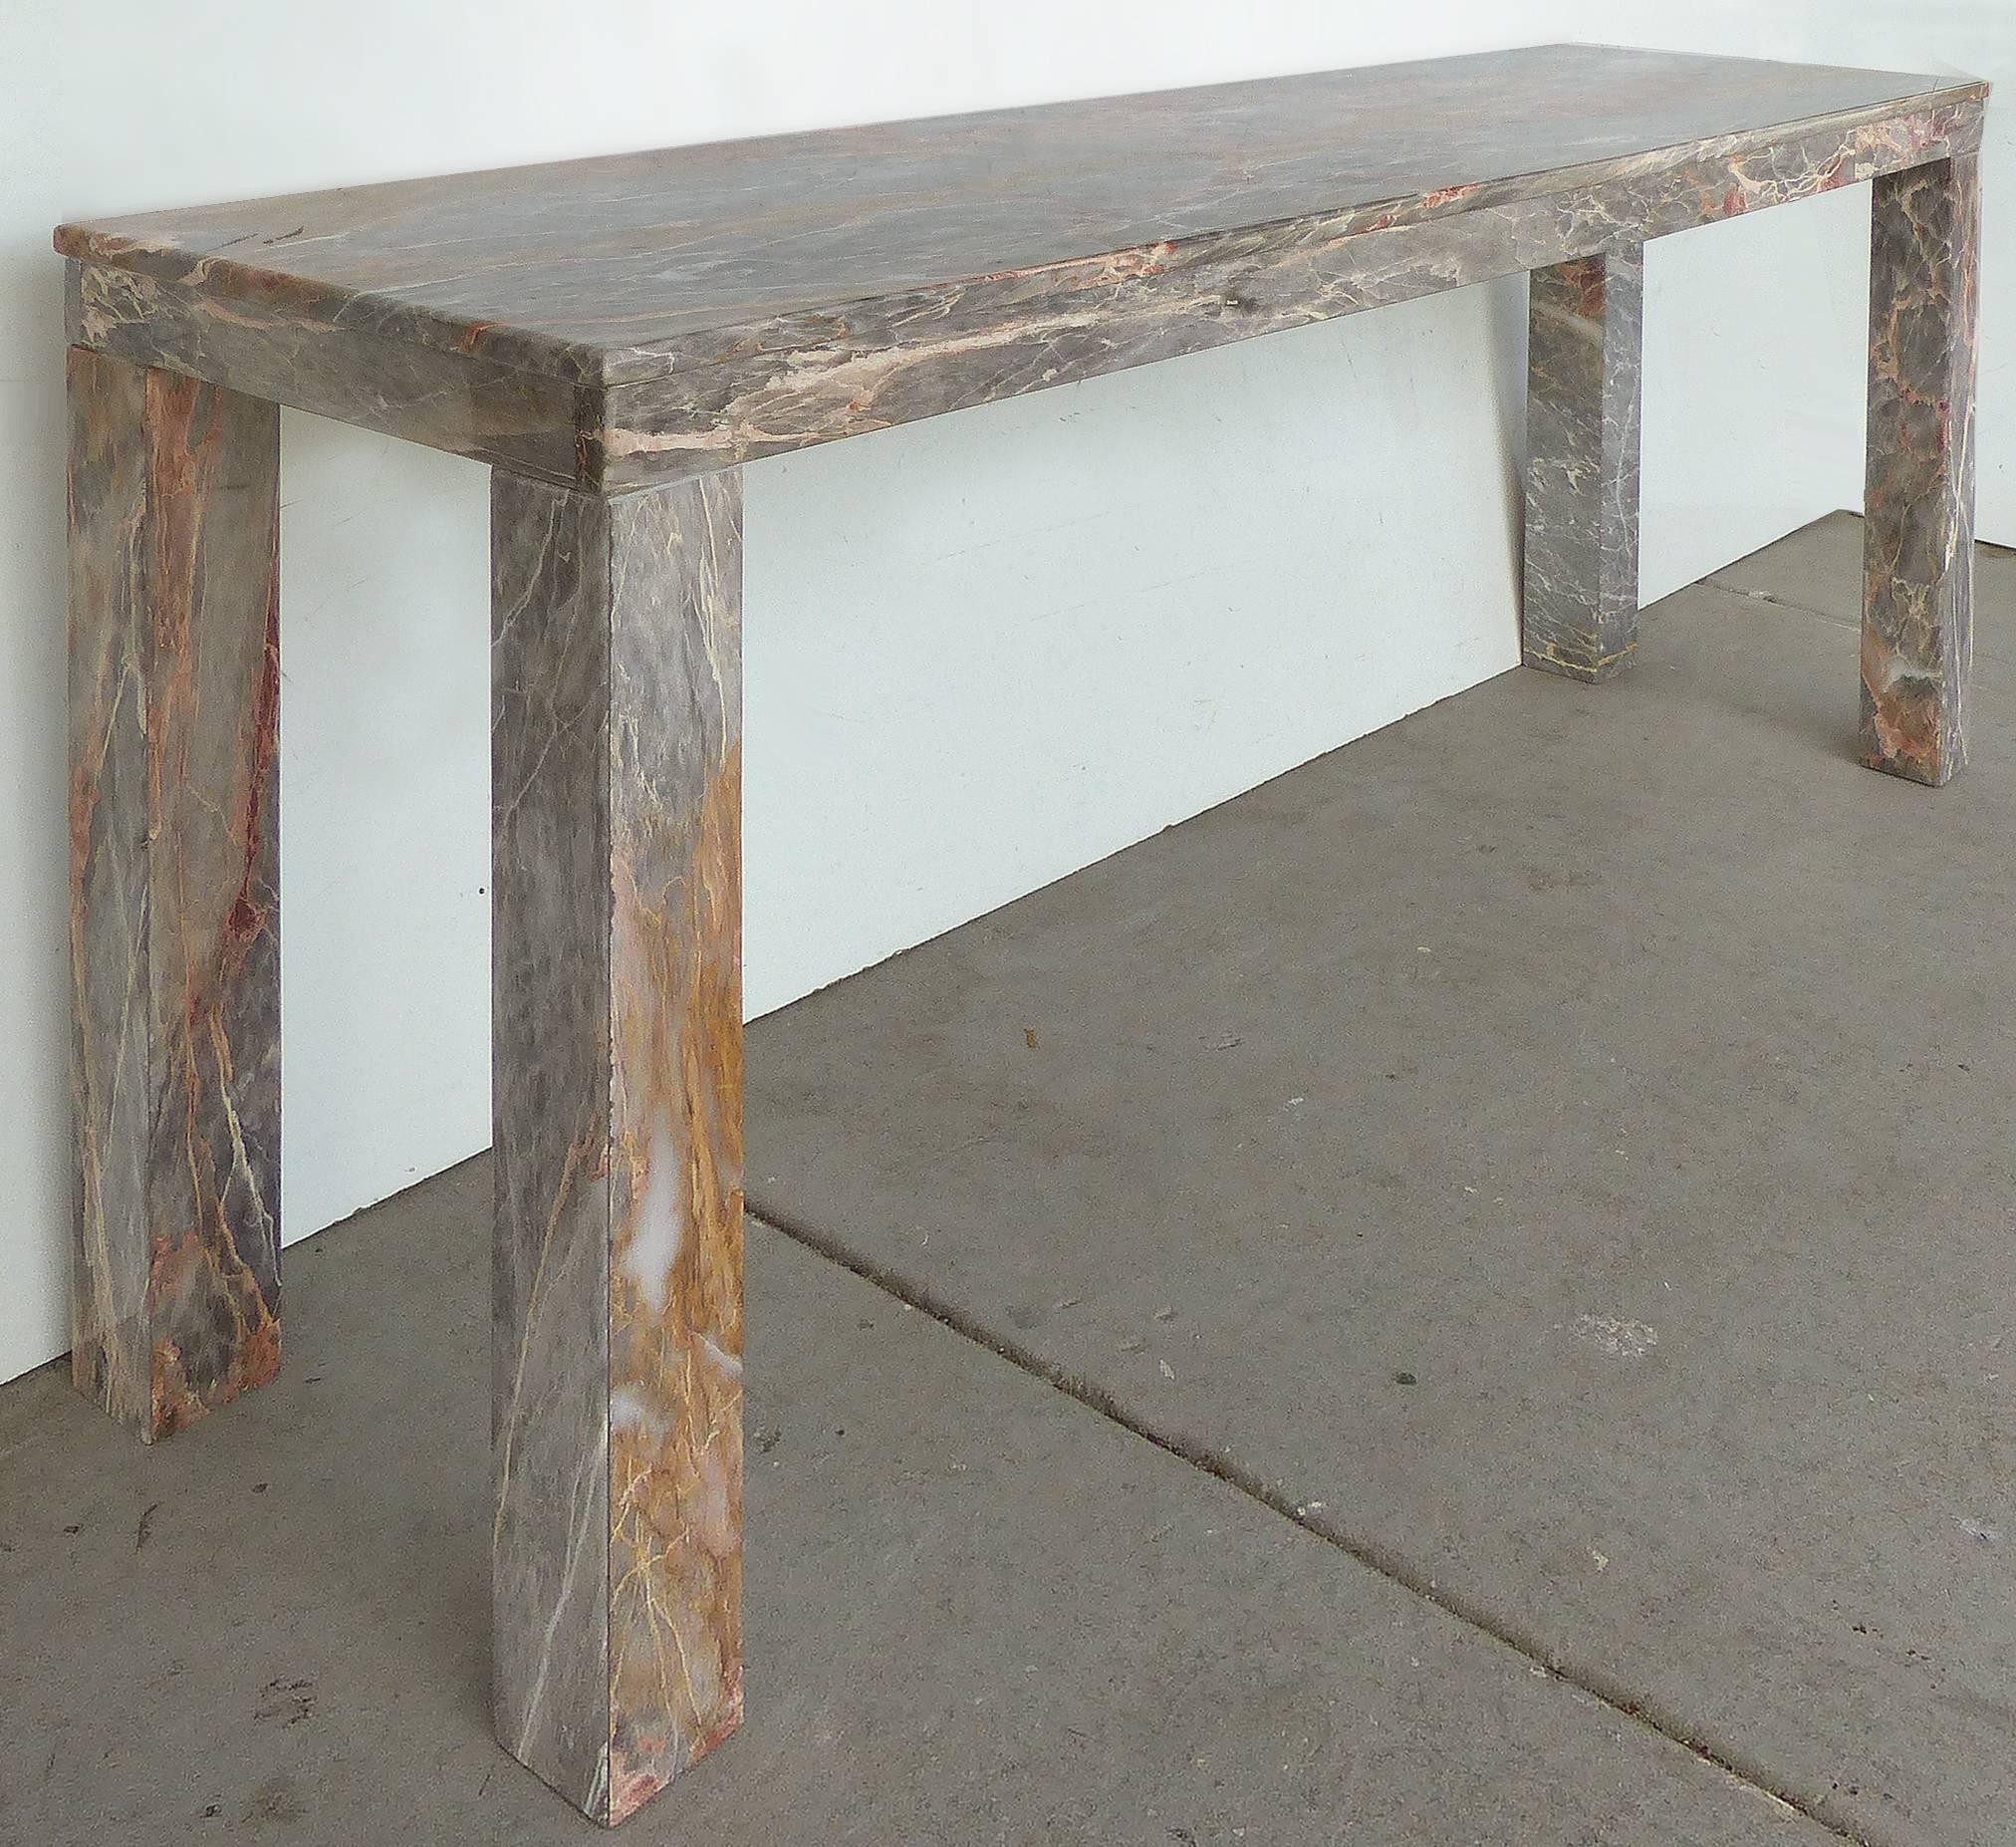 Offered is a sleek custom-made parson's table or console made of a solid slab of beautifully grained multicolored marble.